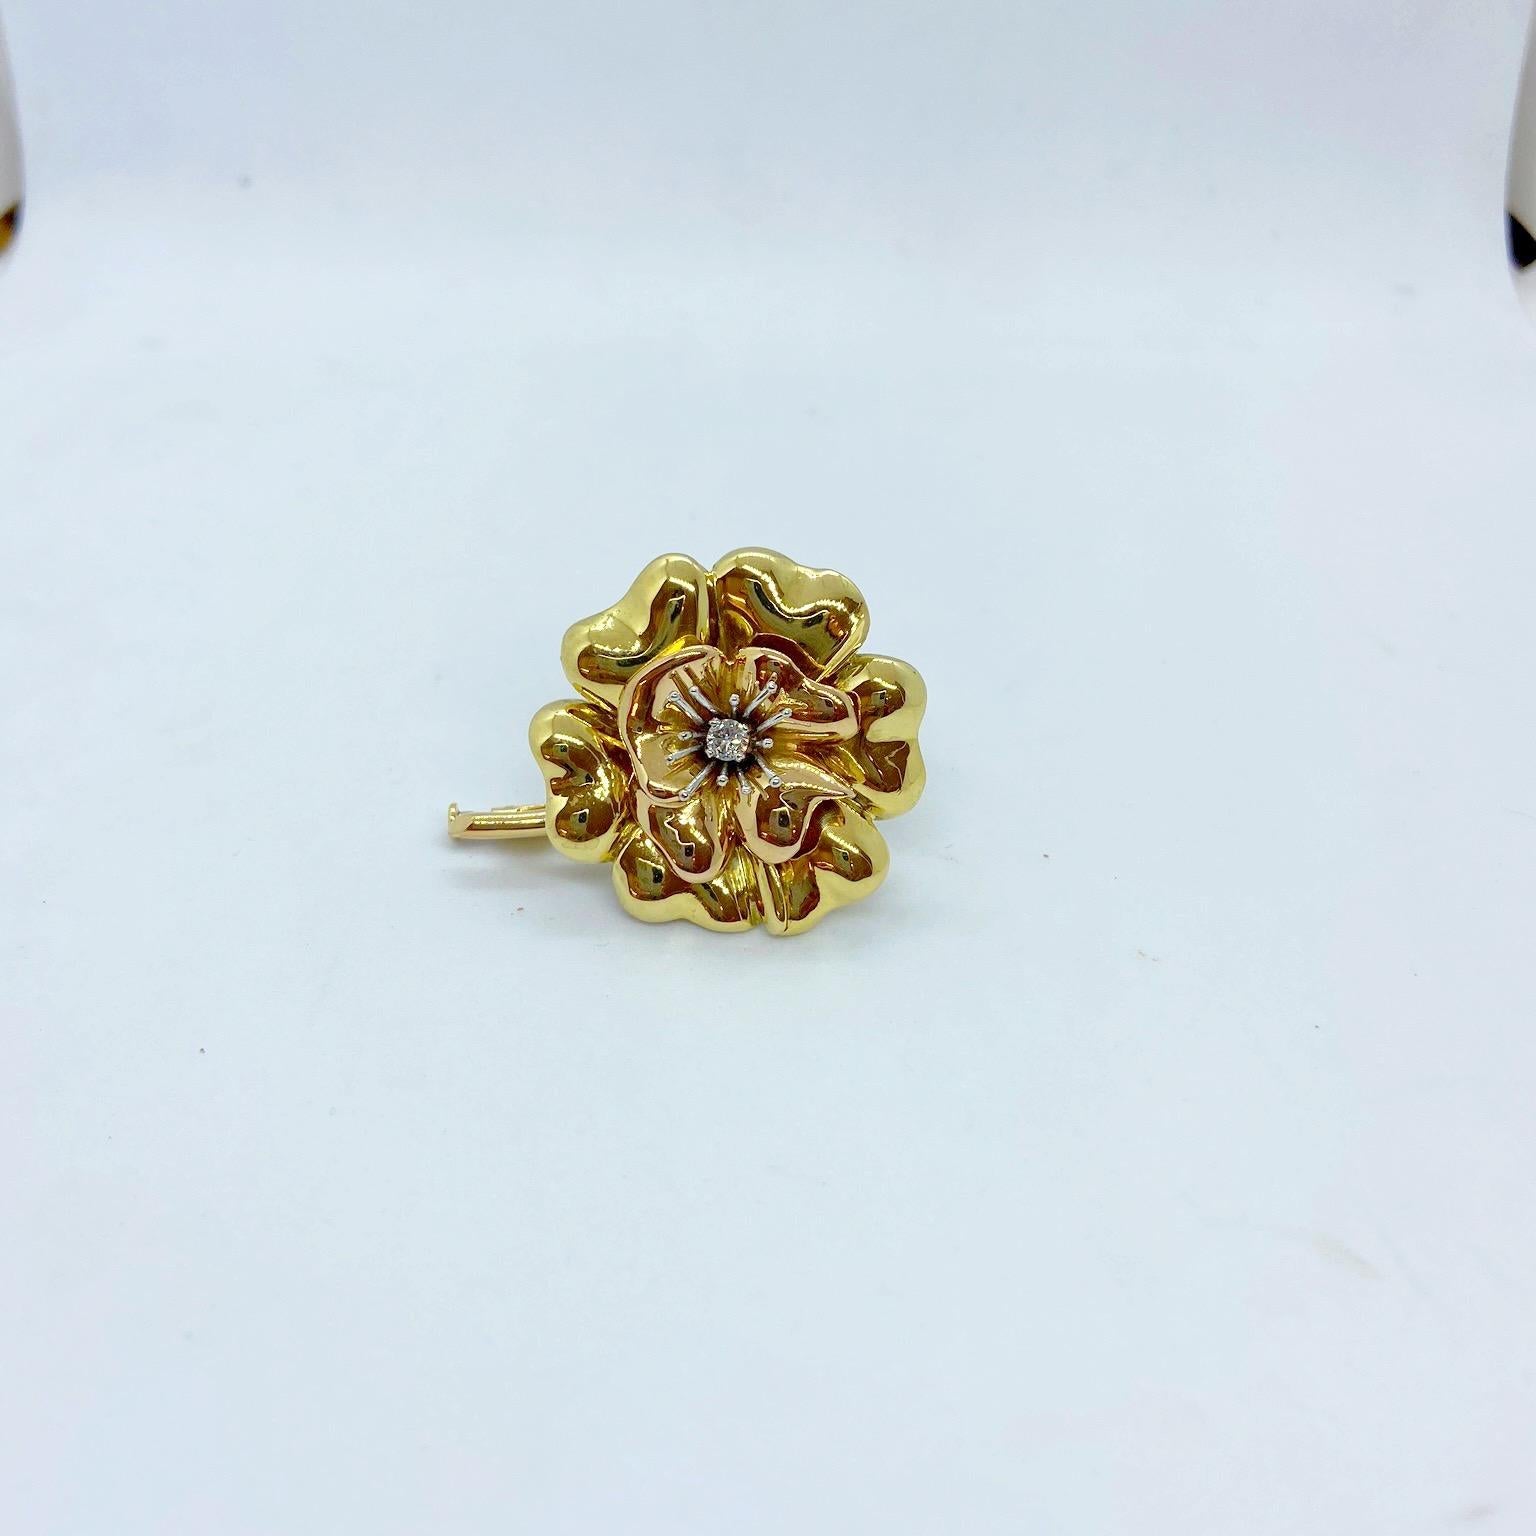 E. Wolfe & Co is a family-run fine jewellery manufacturing Workshop, established in 1850 and located in central London. They specialize in creating beautiful bespoke pieces - such as this one created for Cellini Jewelers In NYC. 
A beautiful flower